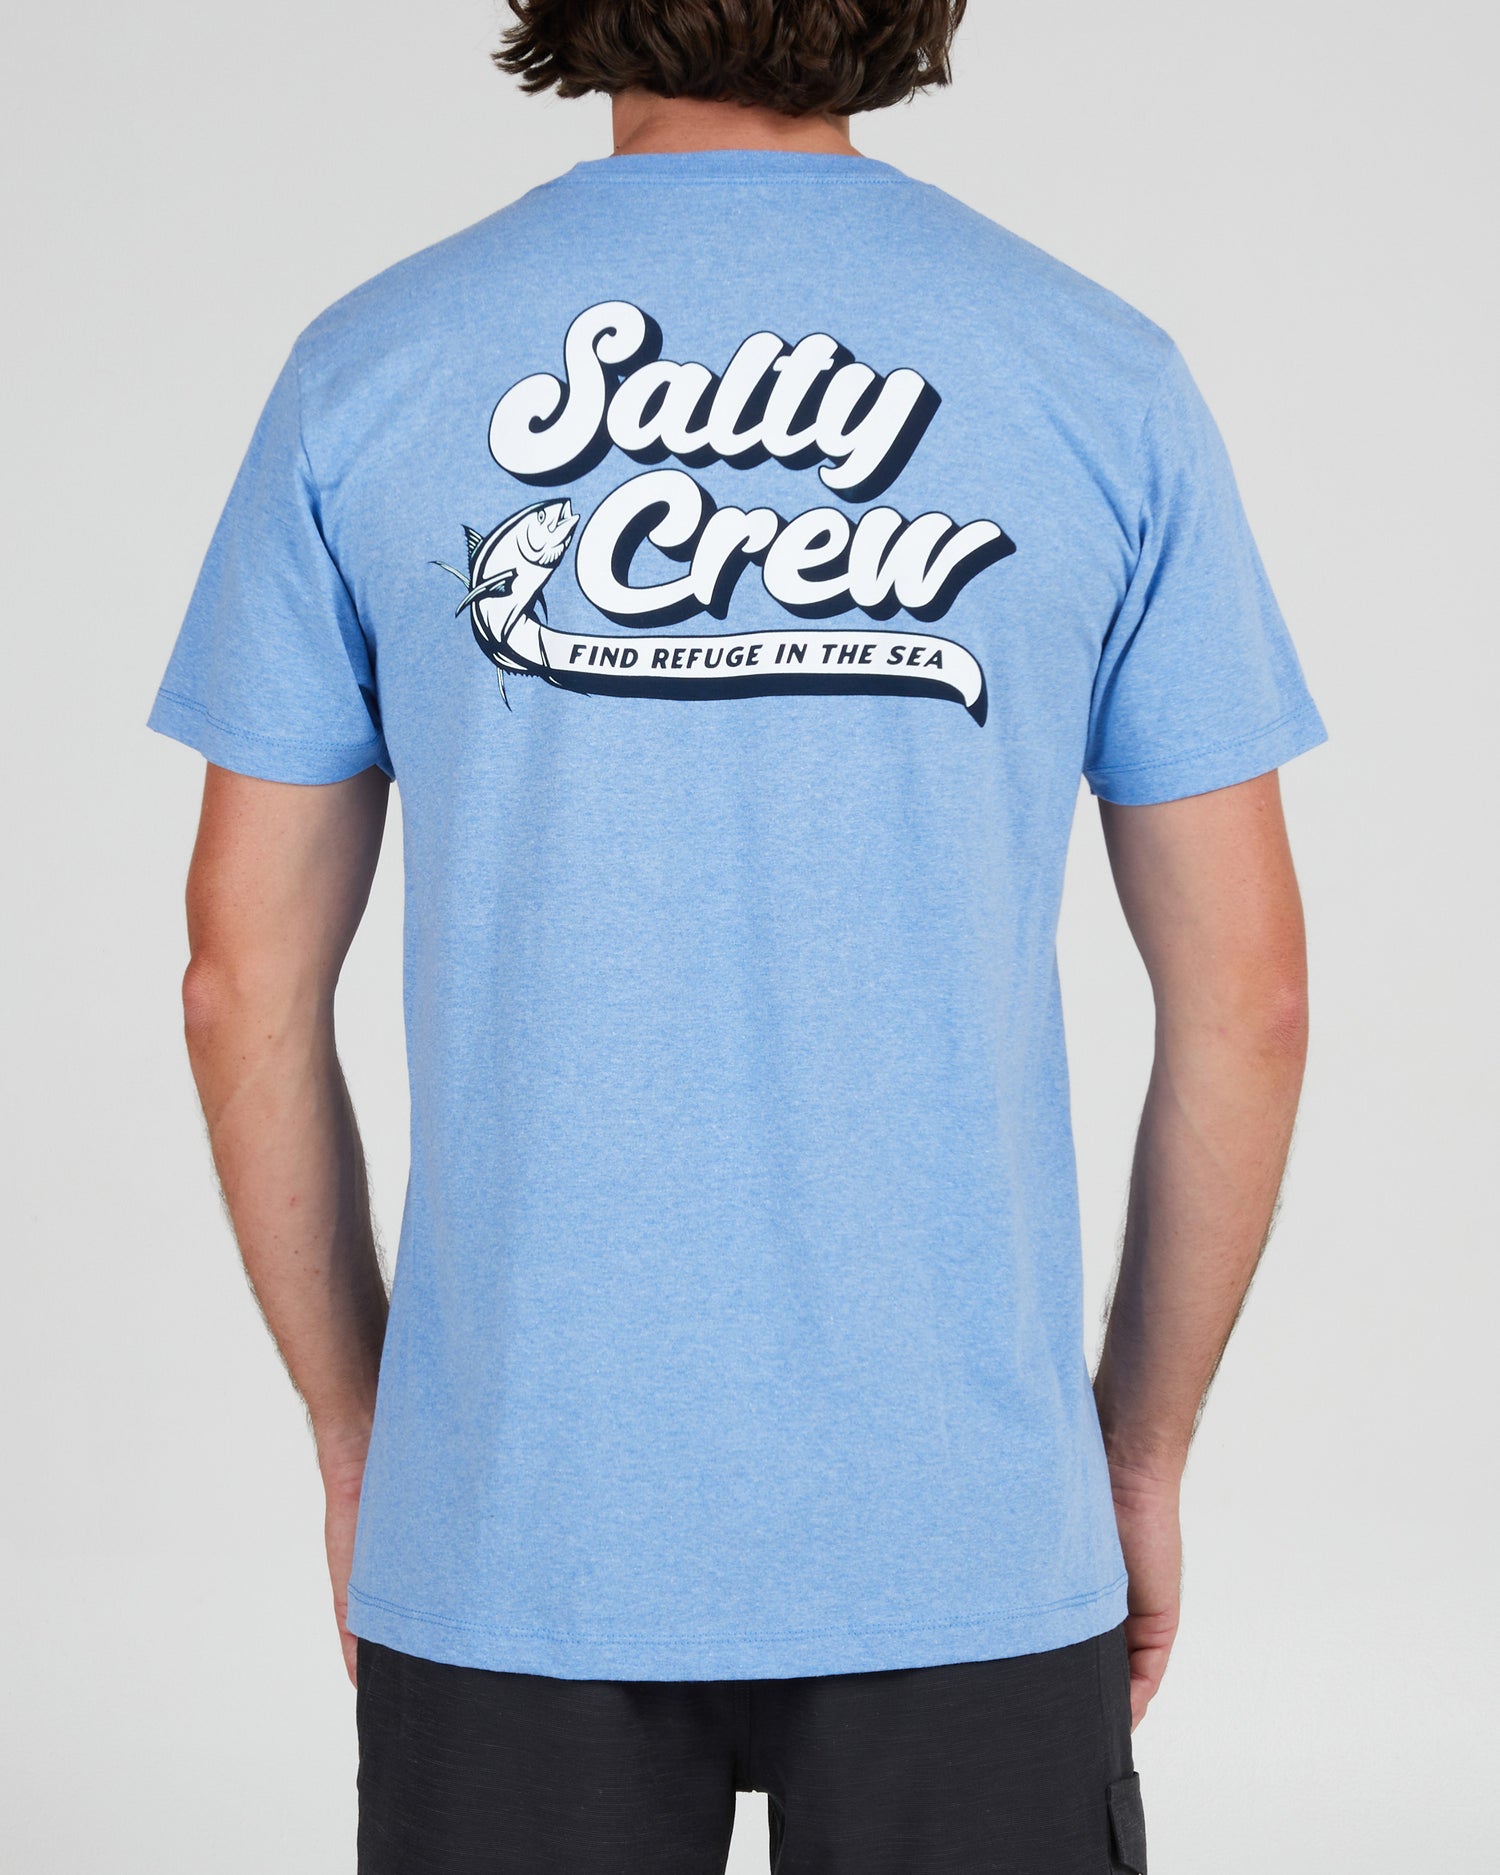 On body back of the Swift Water Light Blue Heather S/S Standard Tee